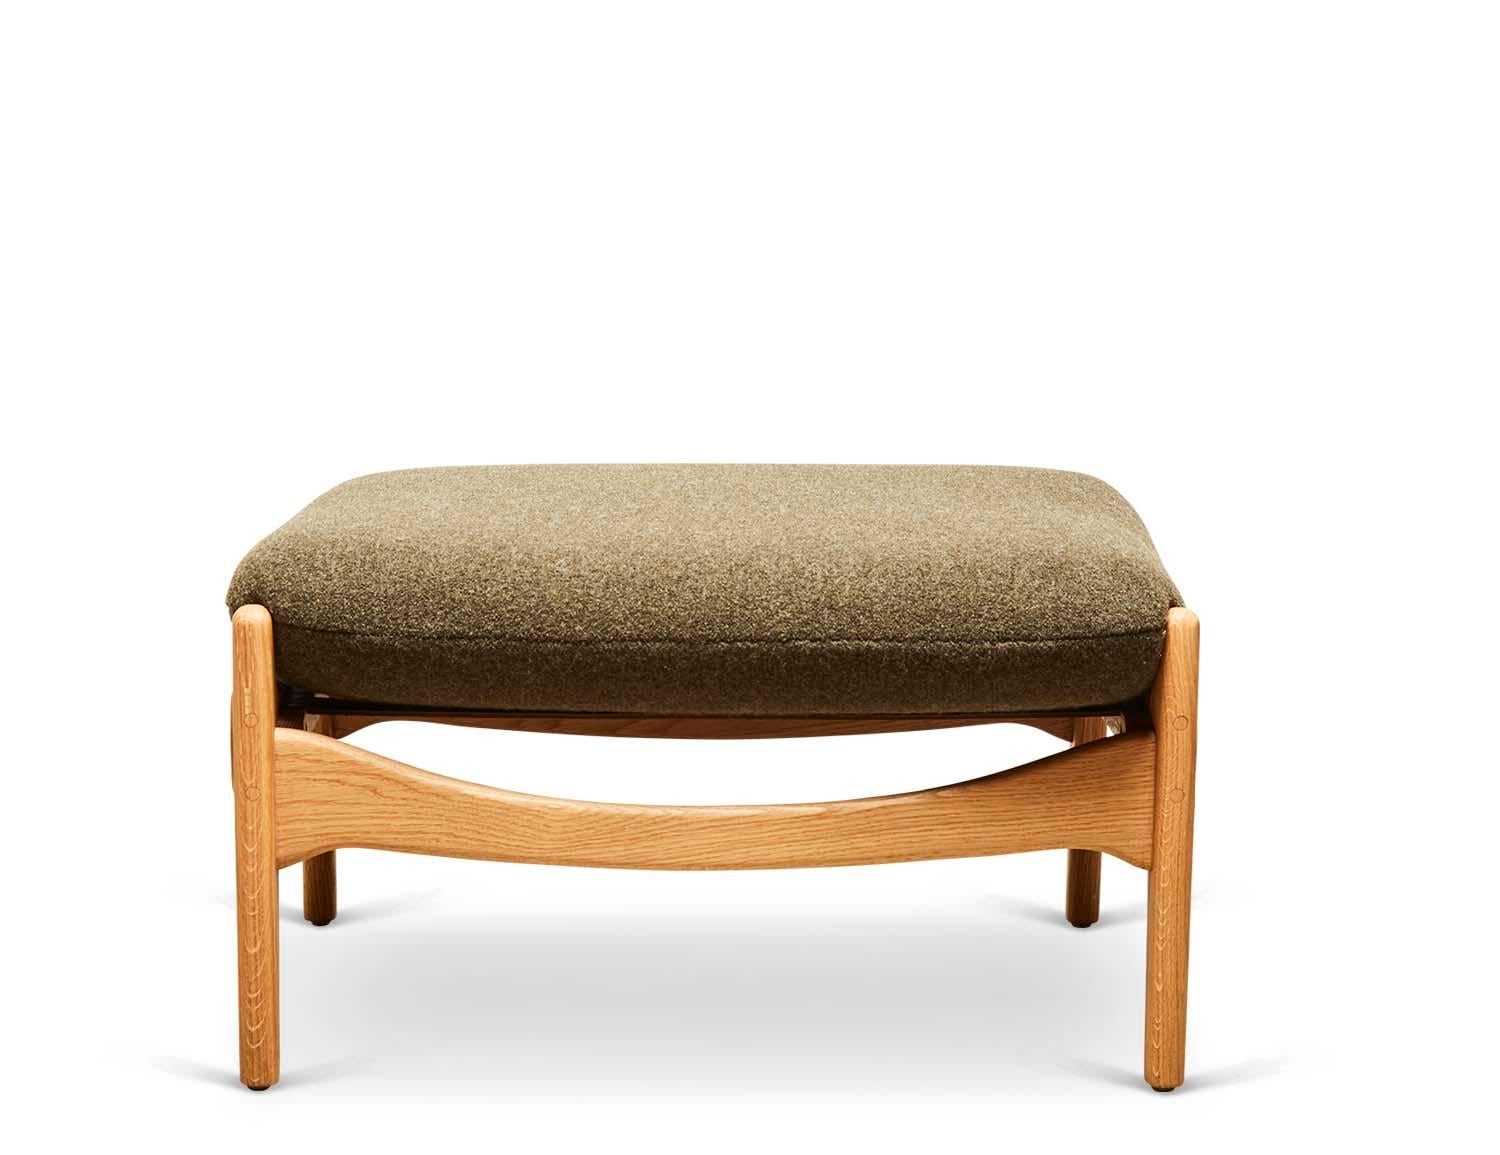 The Maker's ottoman has a solid walnut or oak frame, with a leather sling and loose cushion. Shown here in Oiled oak and dark green boiled wool. 

The Lawson-Fenning Collection is designed and handmade in Los Angeles, California.
Message us to find